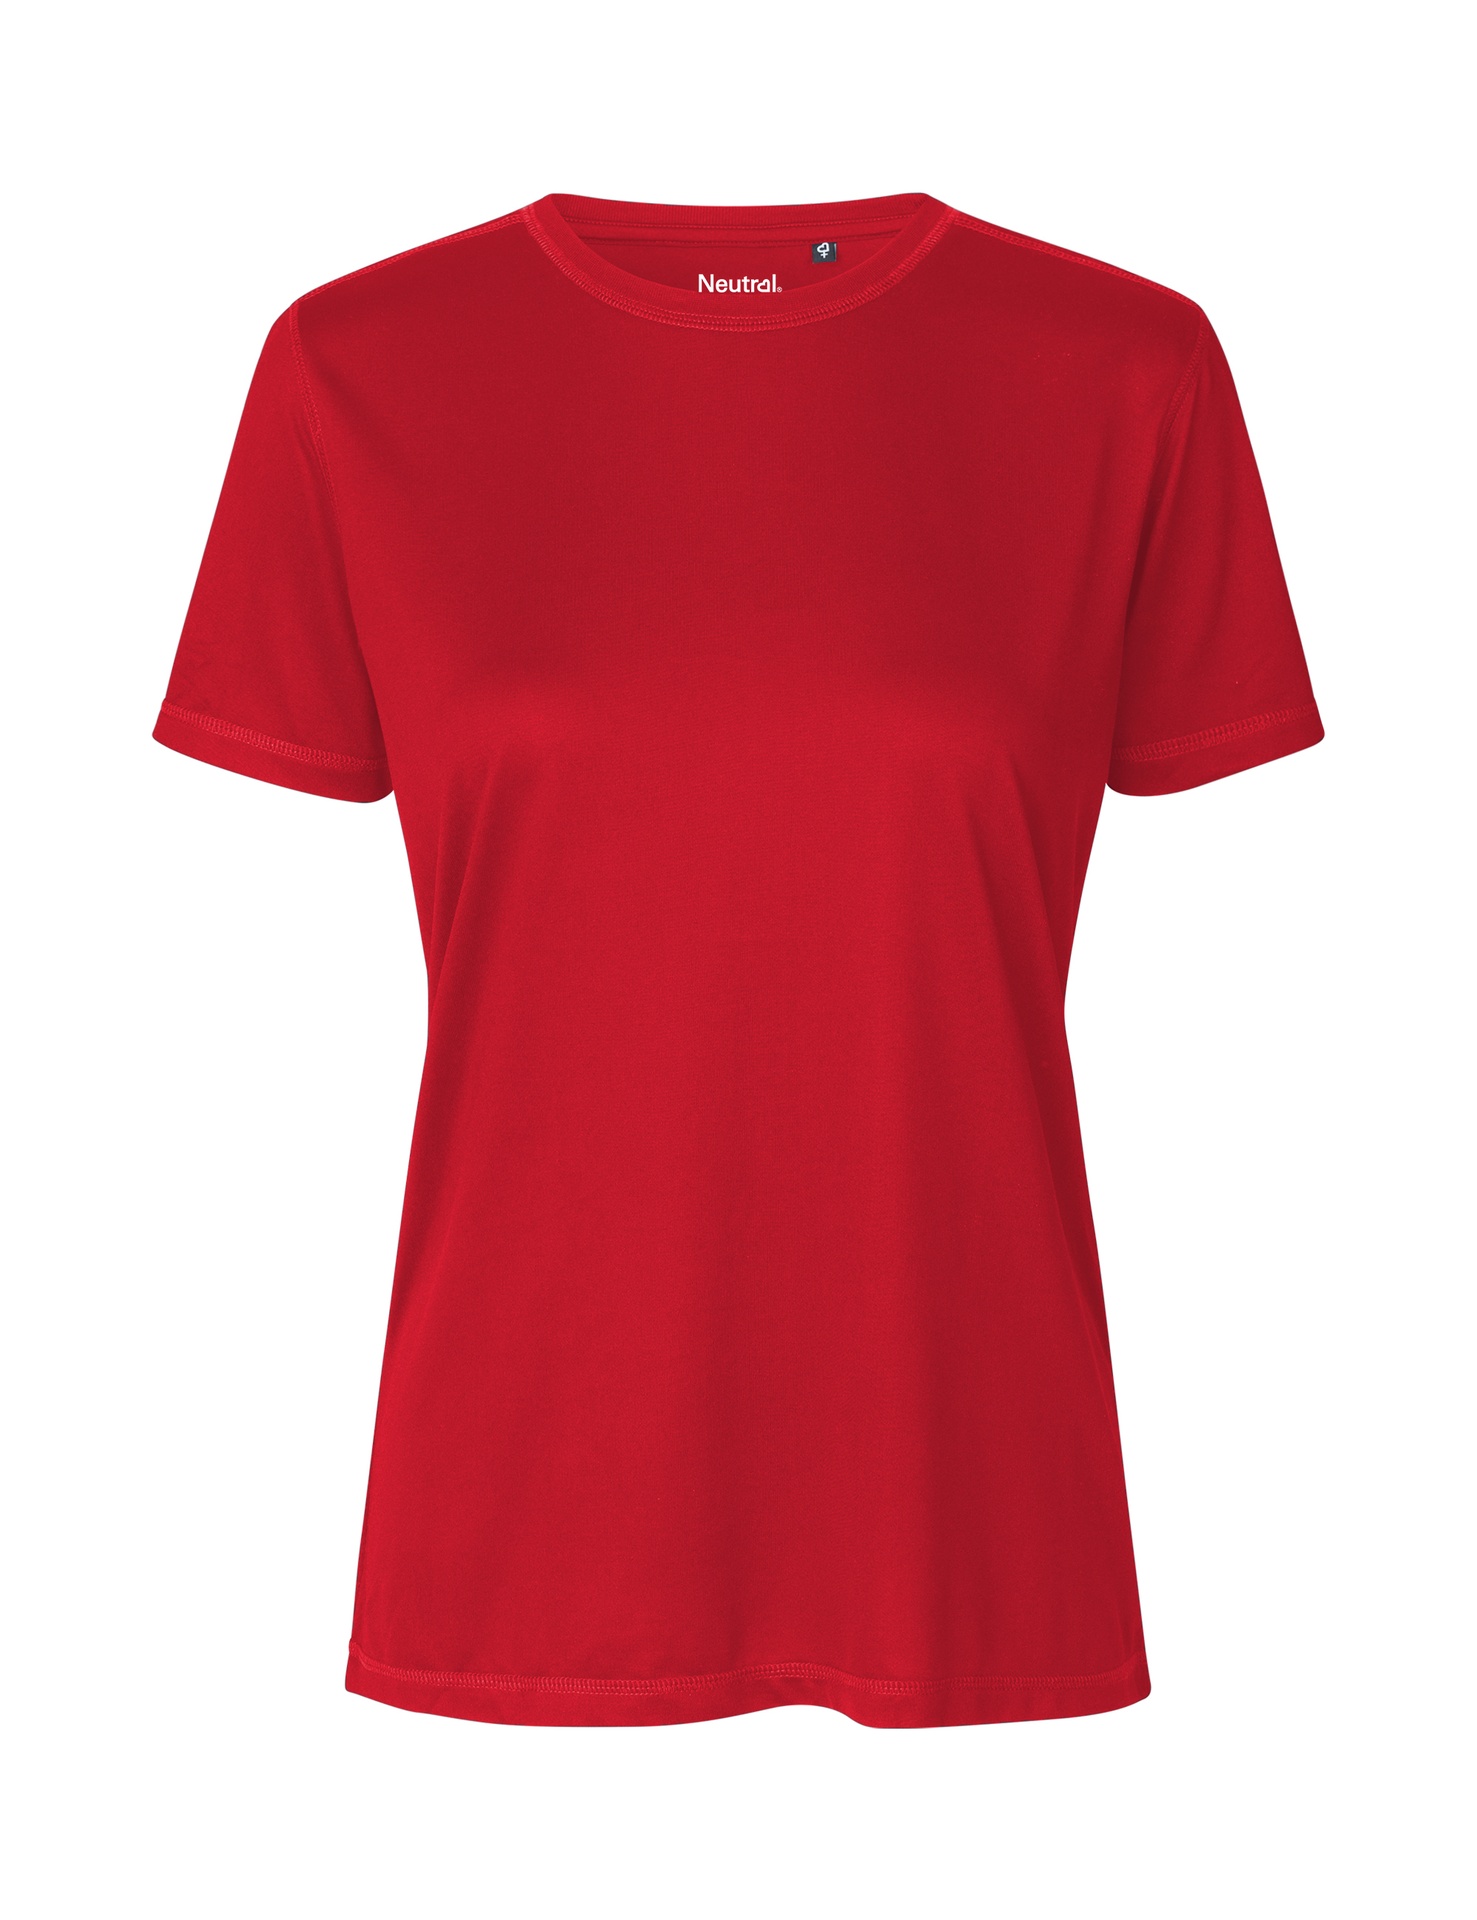 [PR/05214] Ladies Recycled Performance T-Shirt (Red 05, XL)